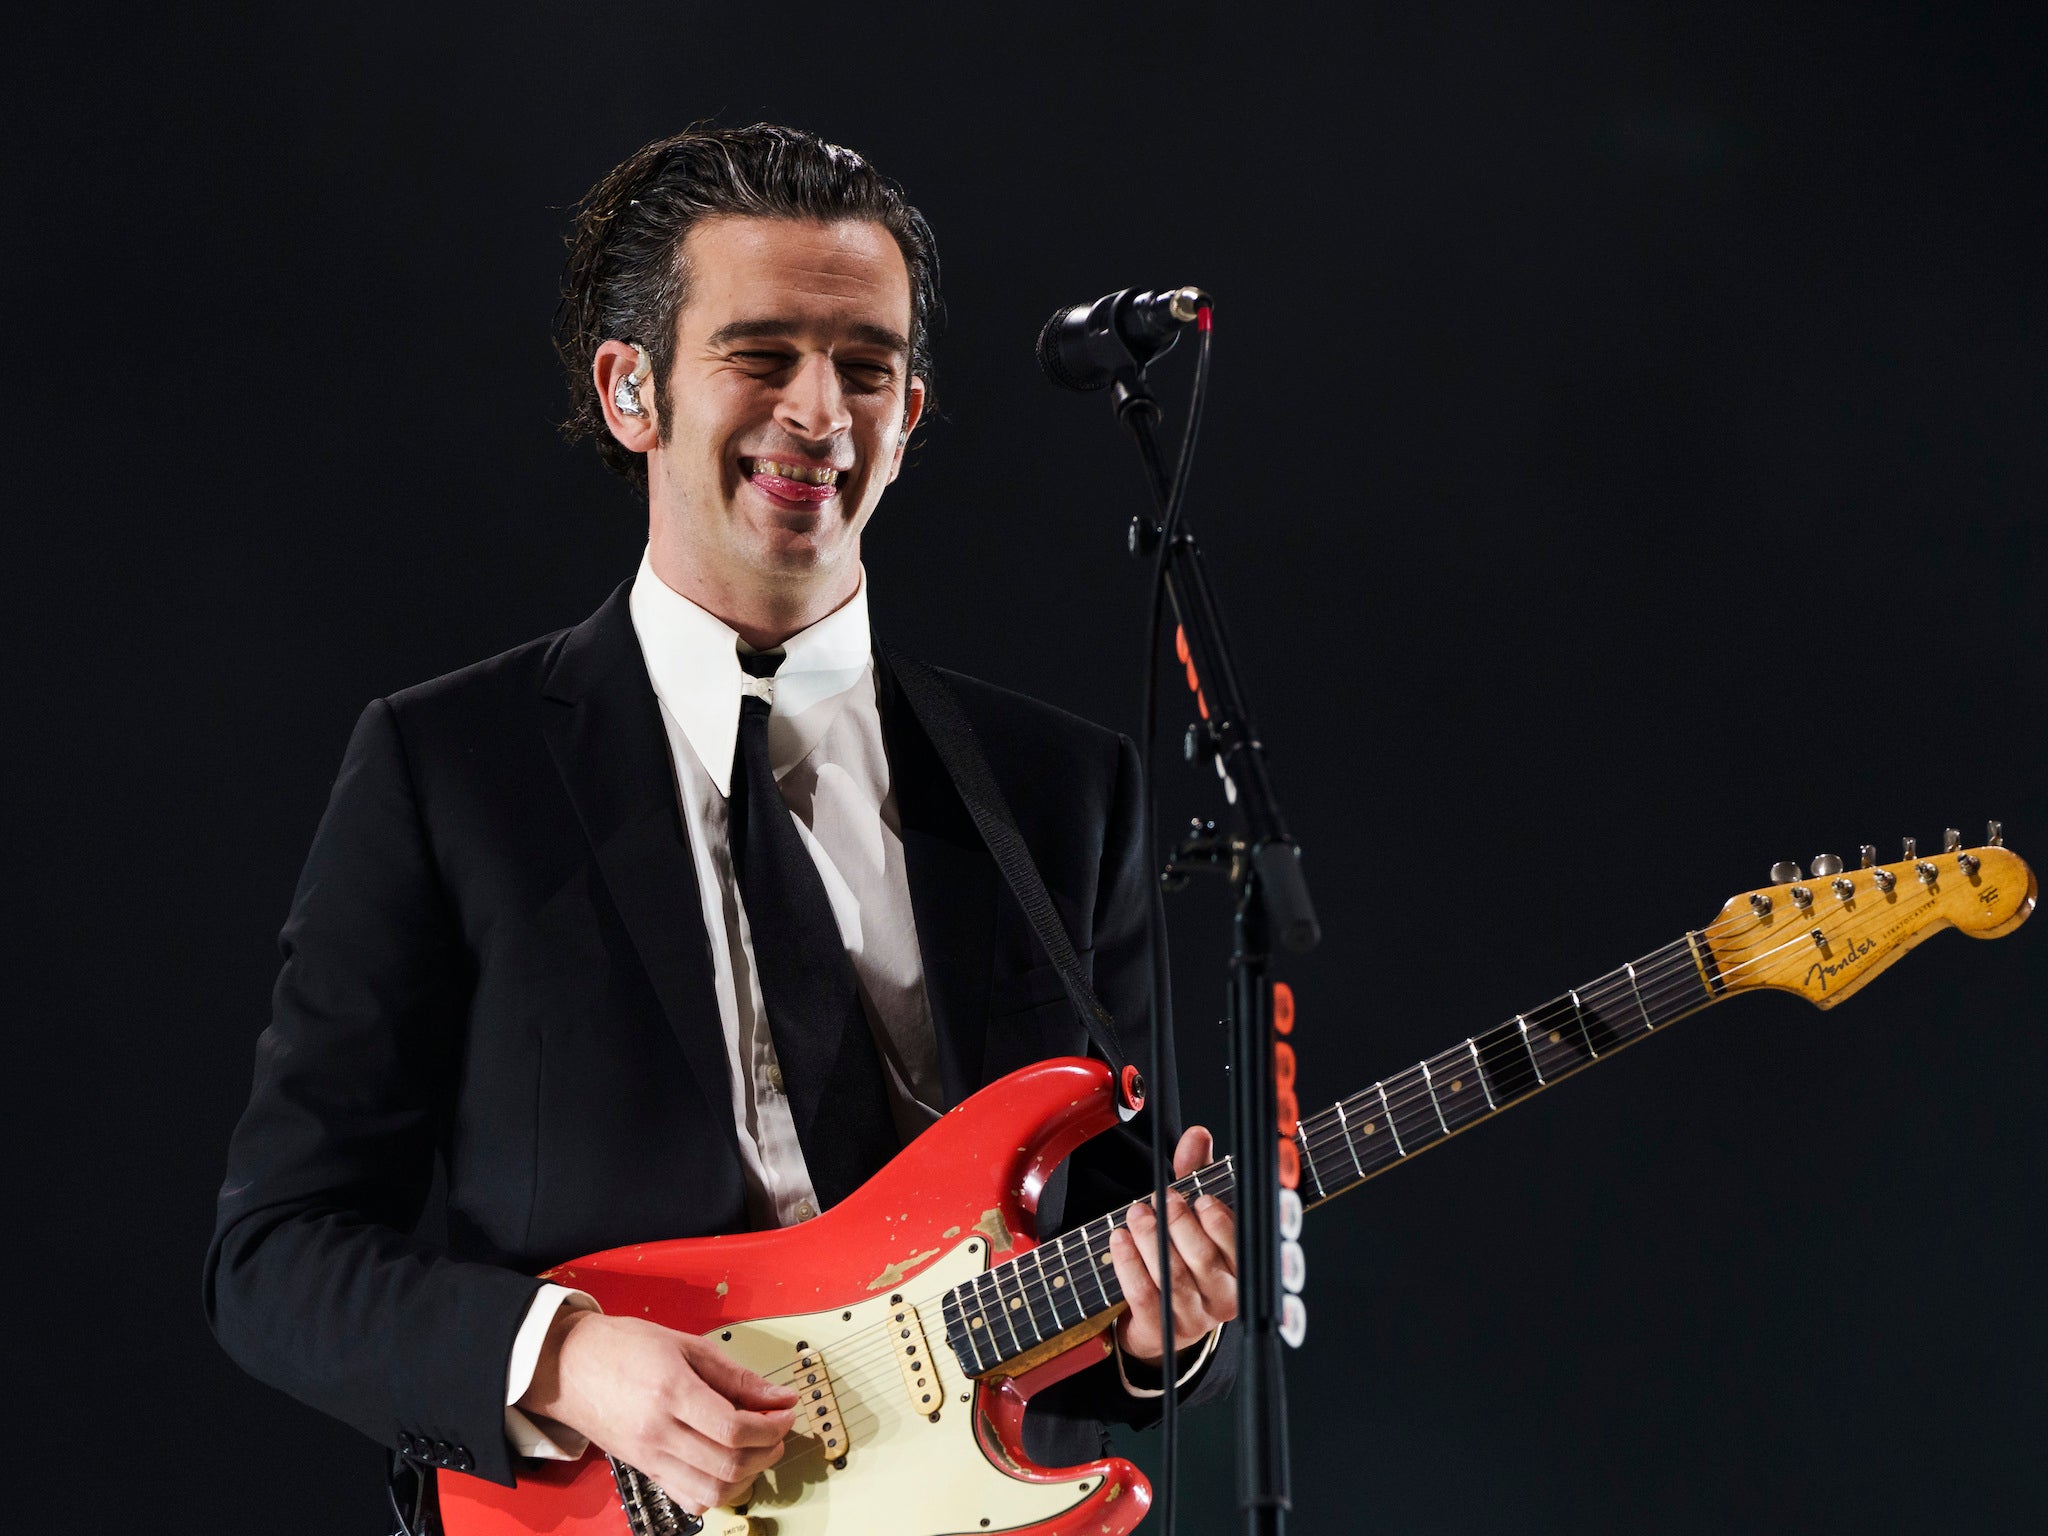 Matthew Healy of the 1975 performs at the Reading Music Festival